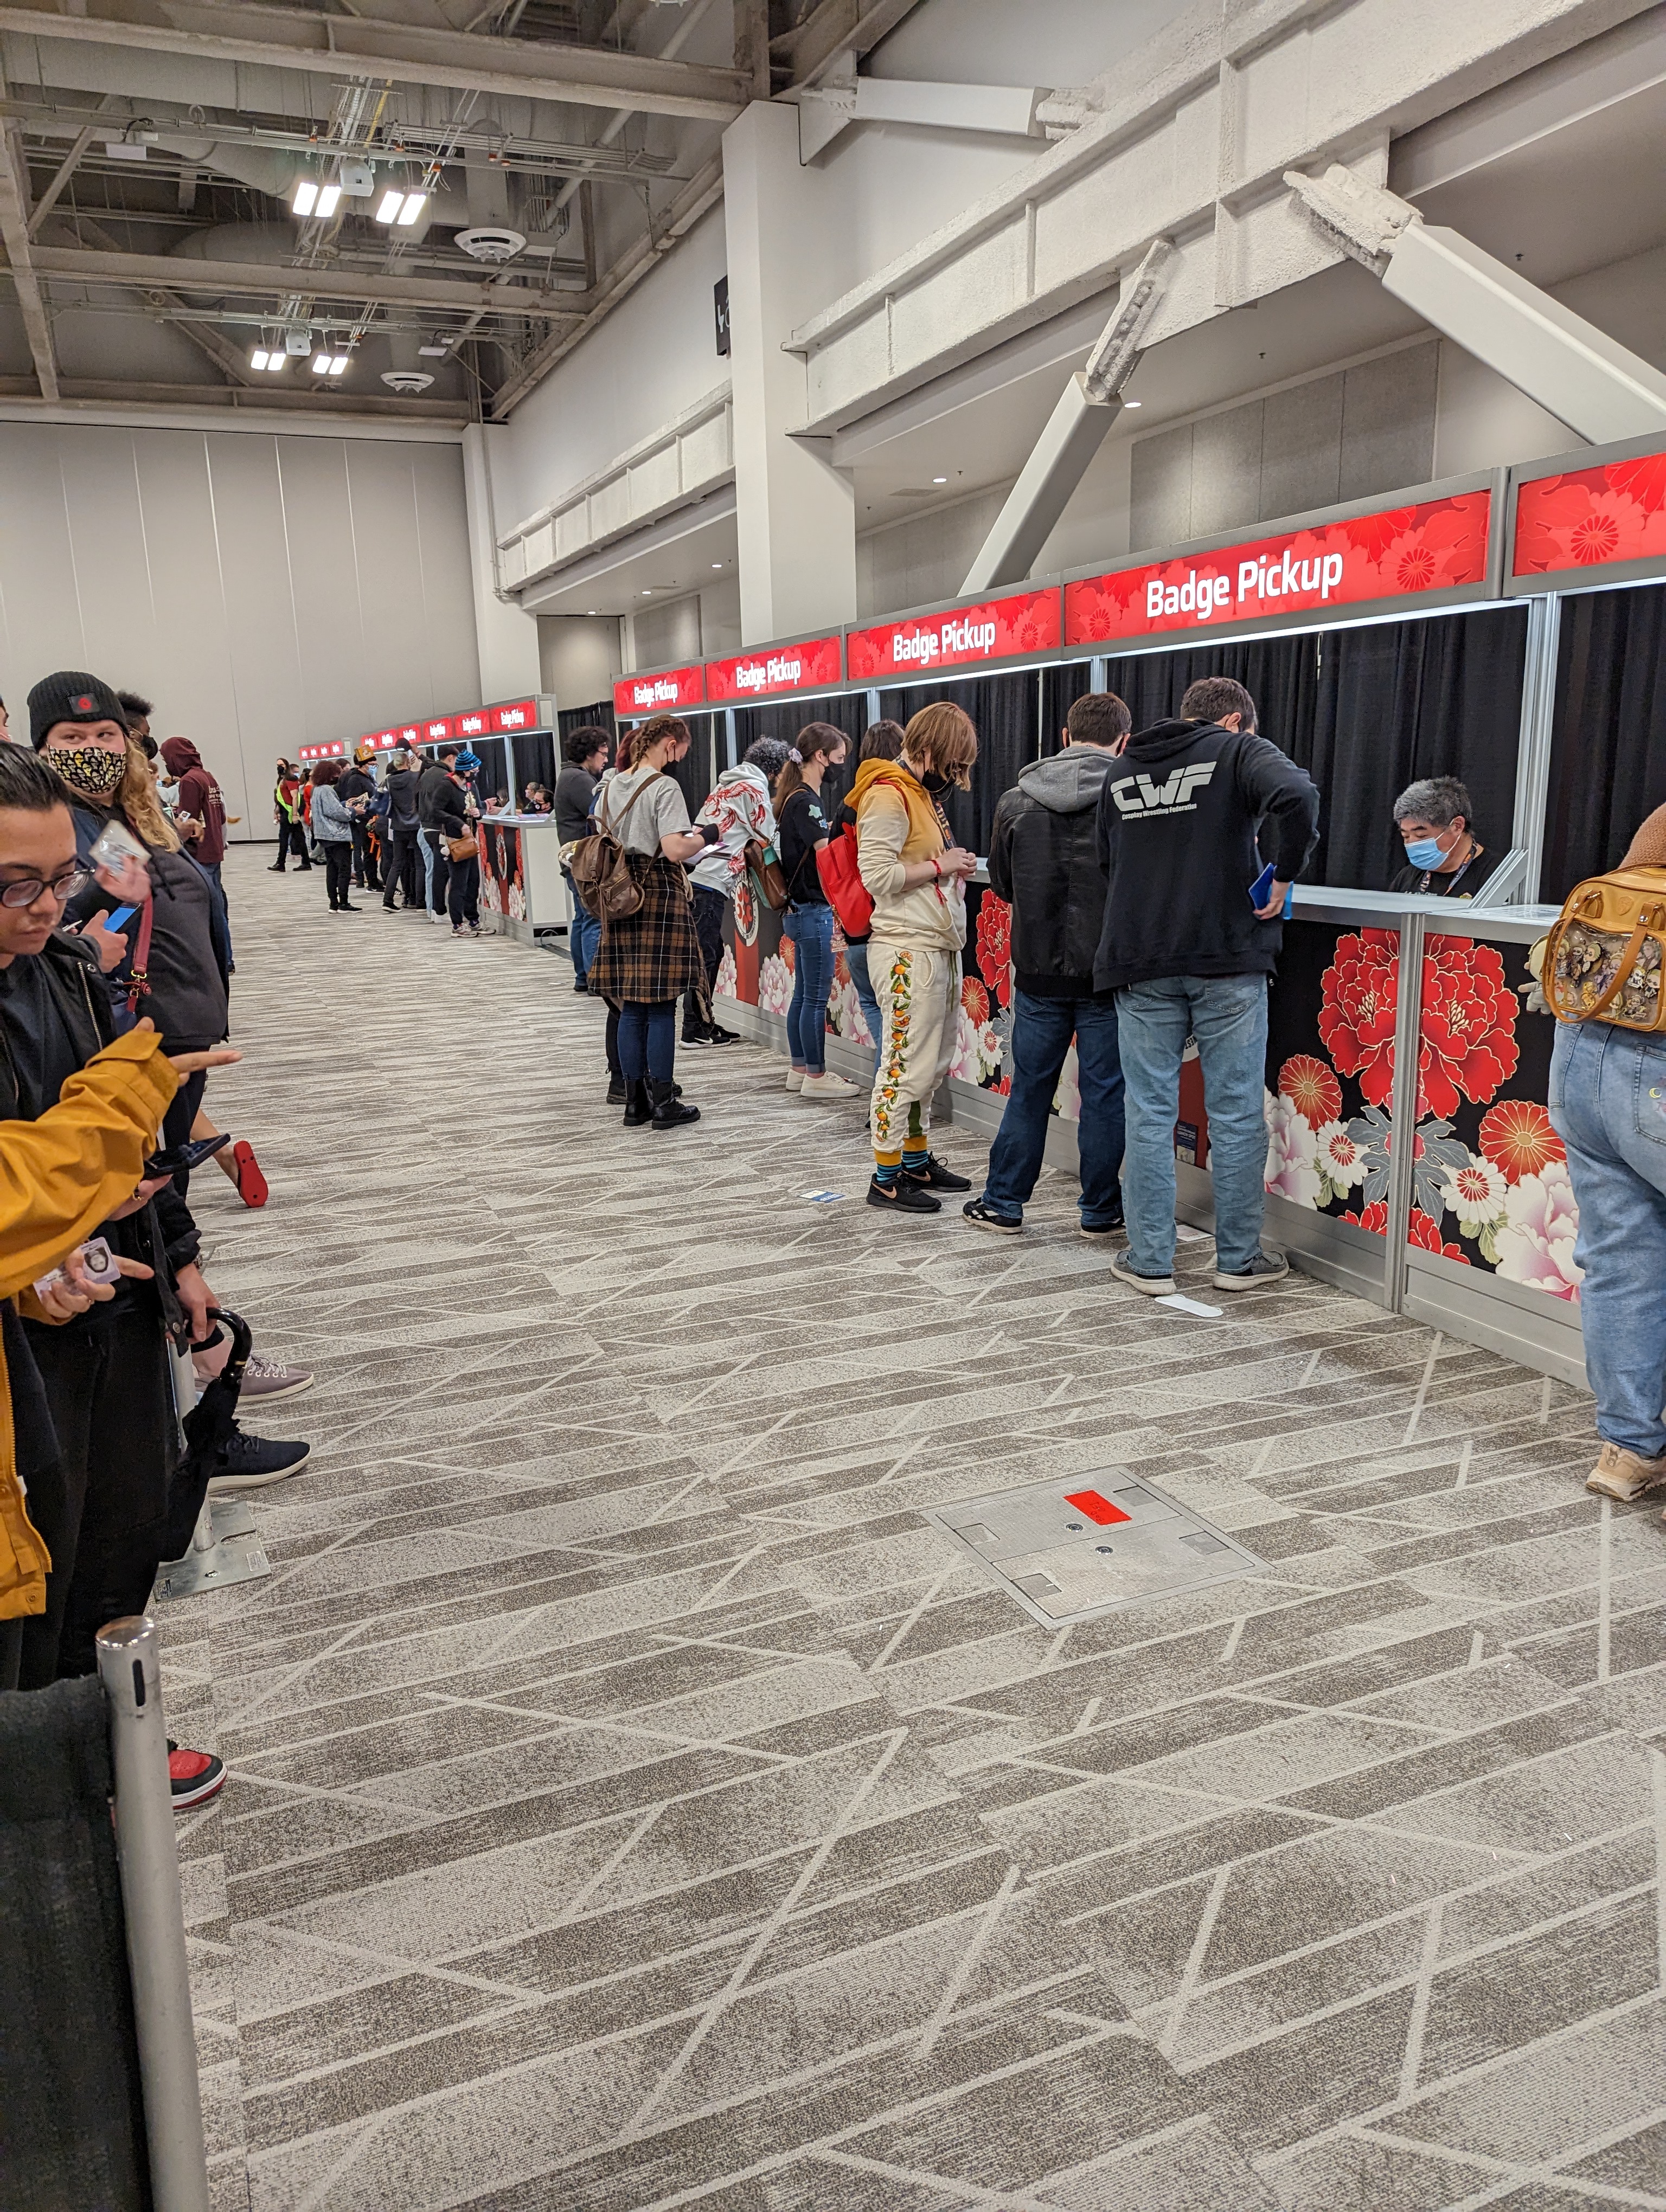 Picture of twelve badge pickup booths, all servingpeople